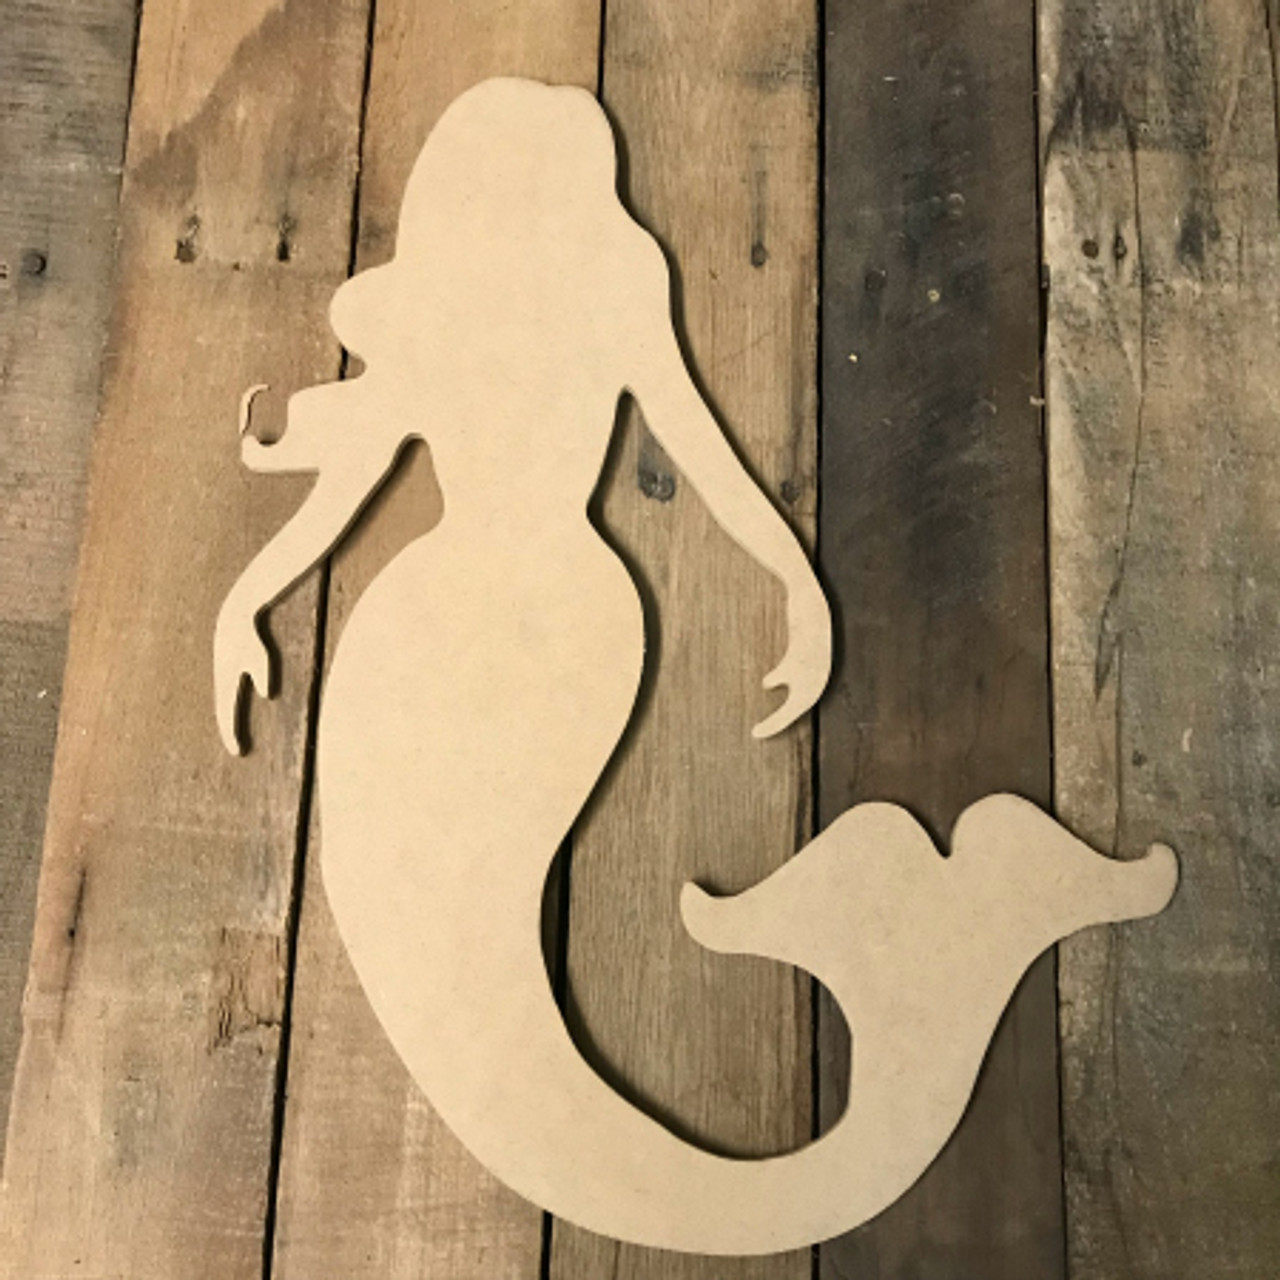 Mermaid cutout Unfinished wood shapes Mermaid tail shape Wooden blank shapes for crafts and decorations